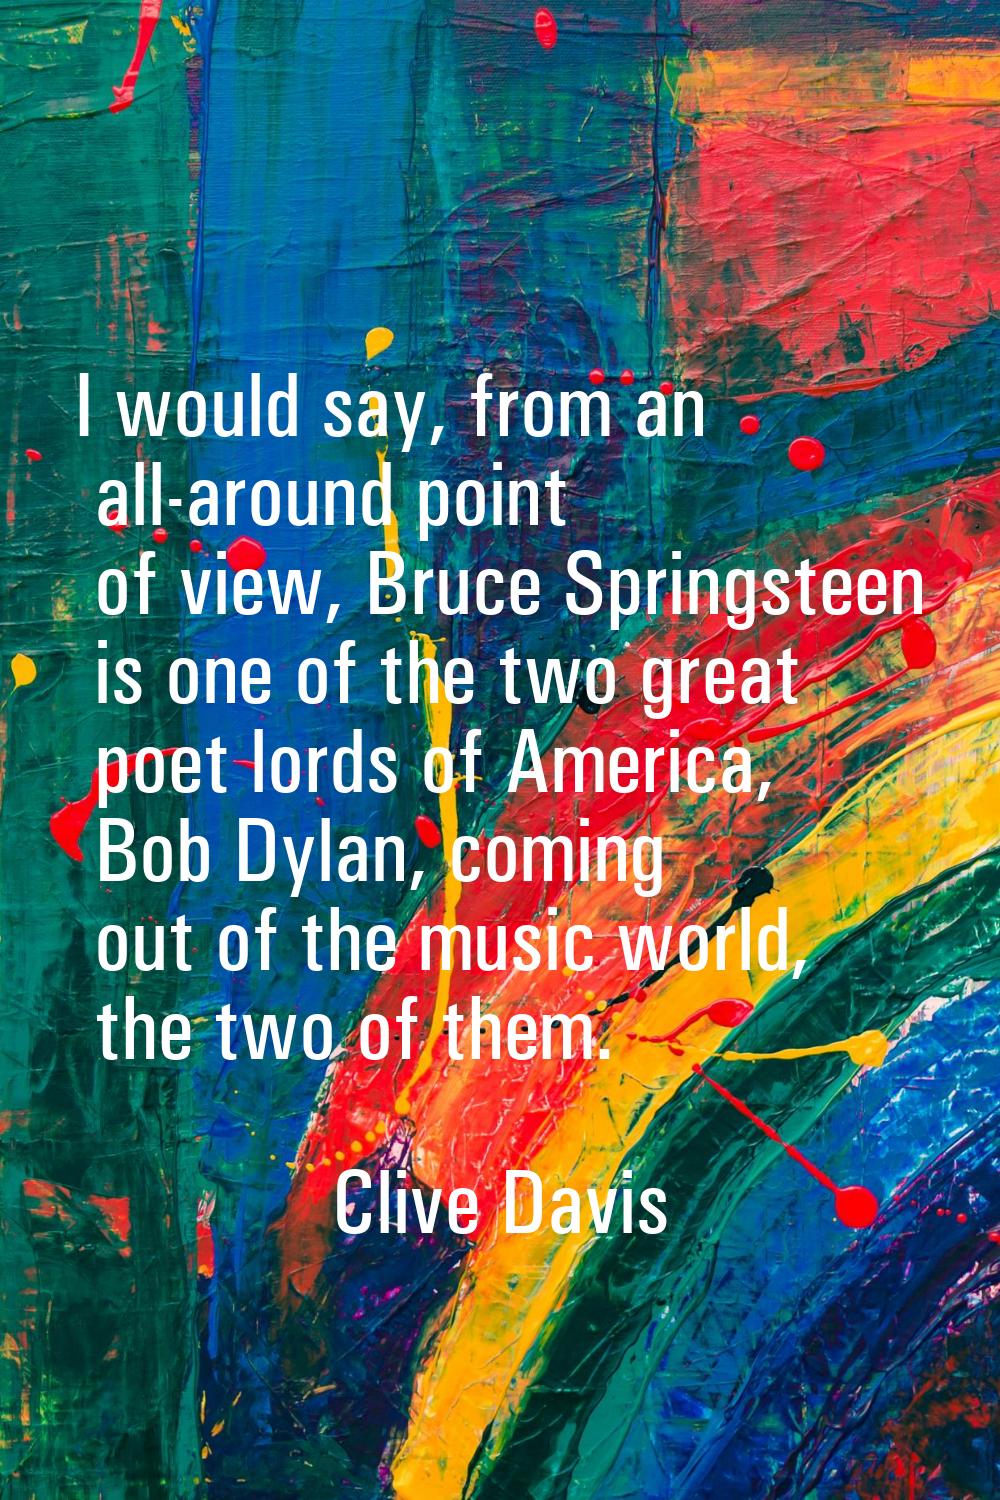 I would say, from an all-around point of view, Bruce Springsteen is one of the two great poet lords